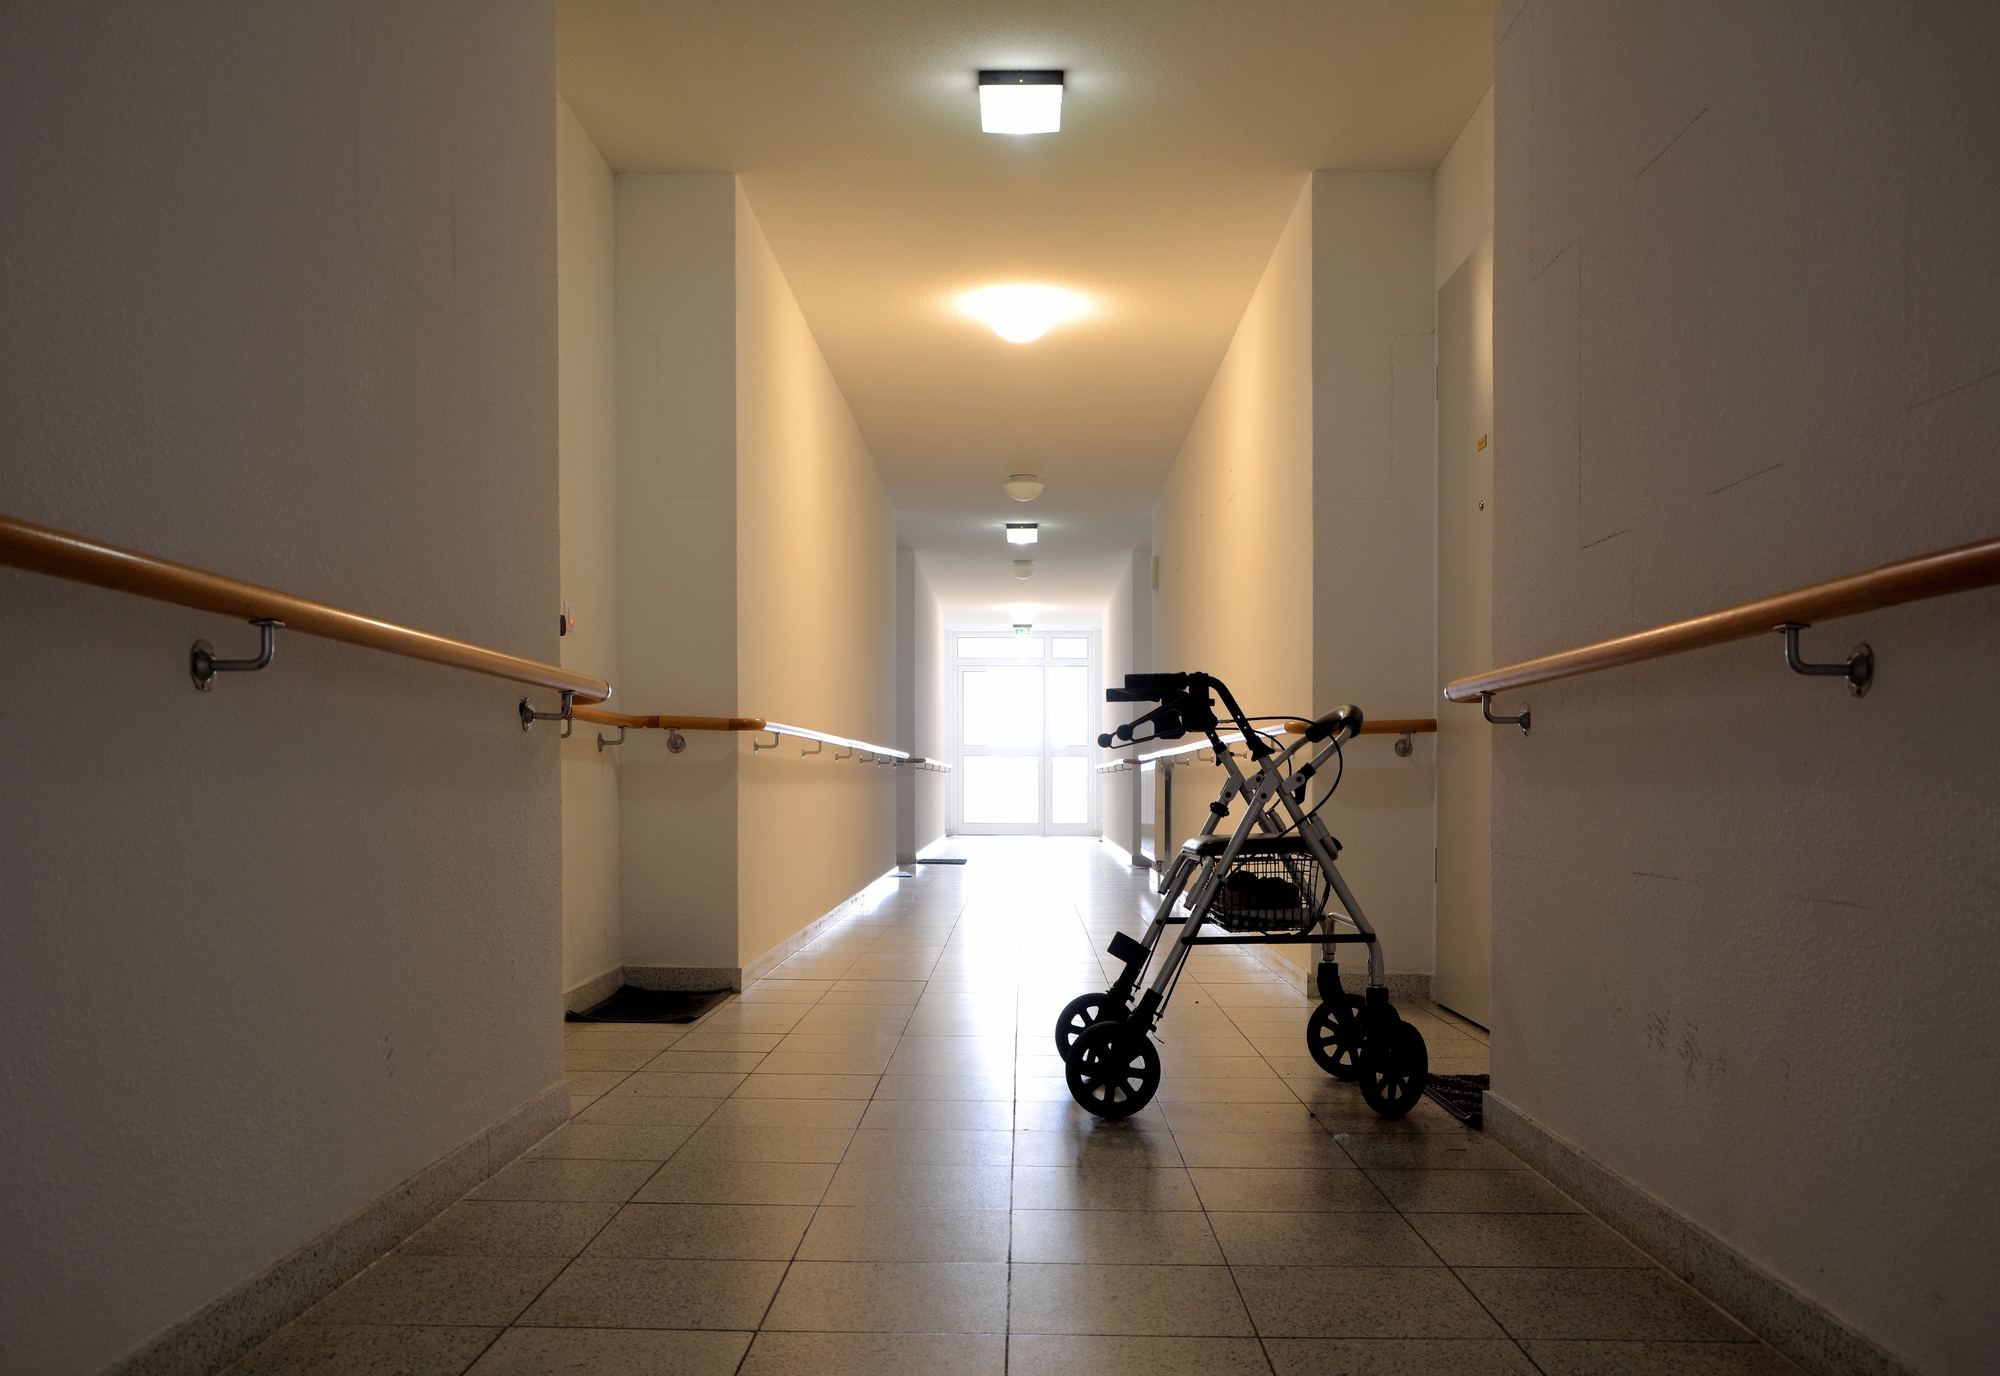 How Common is Sexual Abuse in Nursing Homes